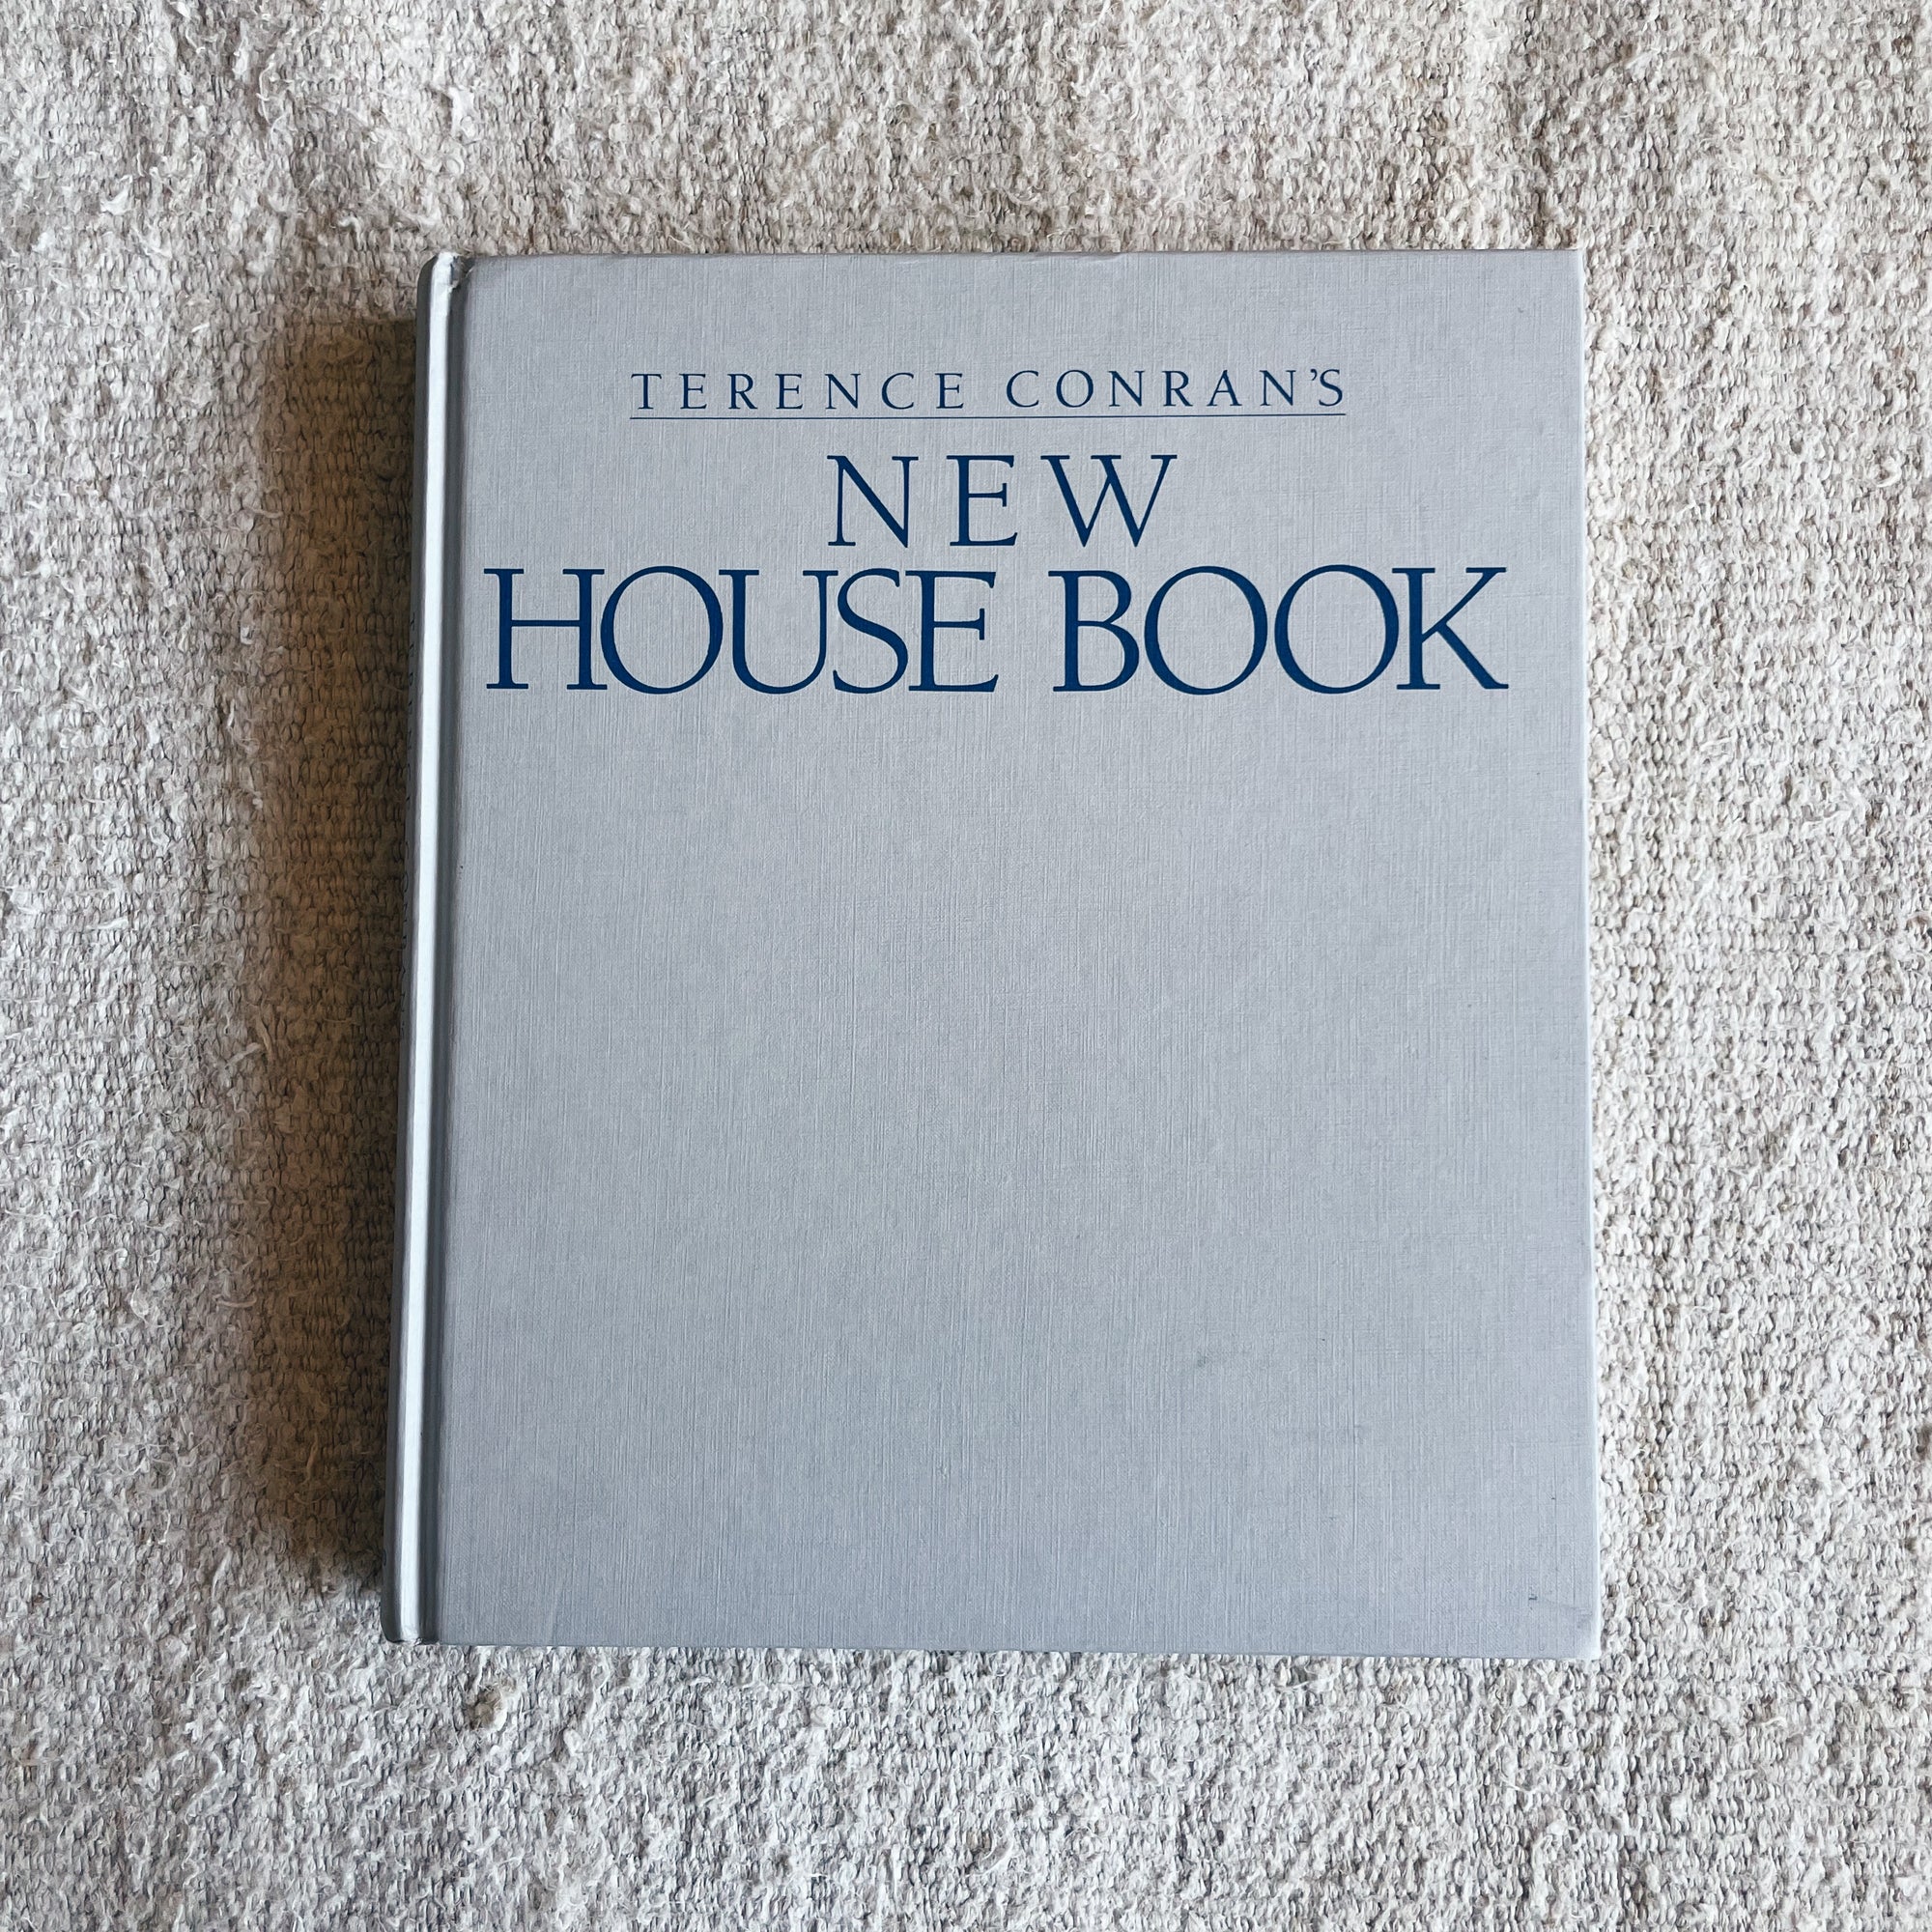 The New House Book